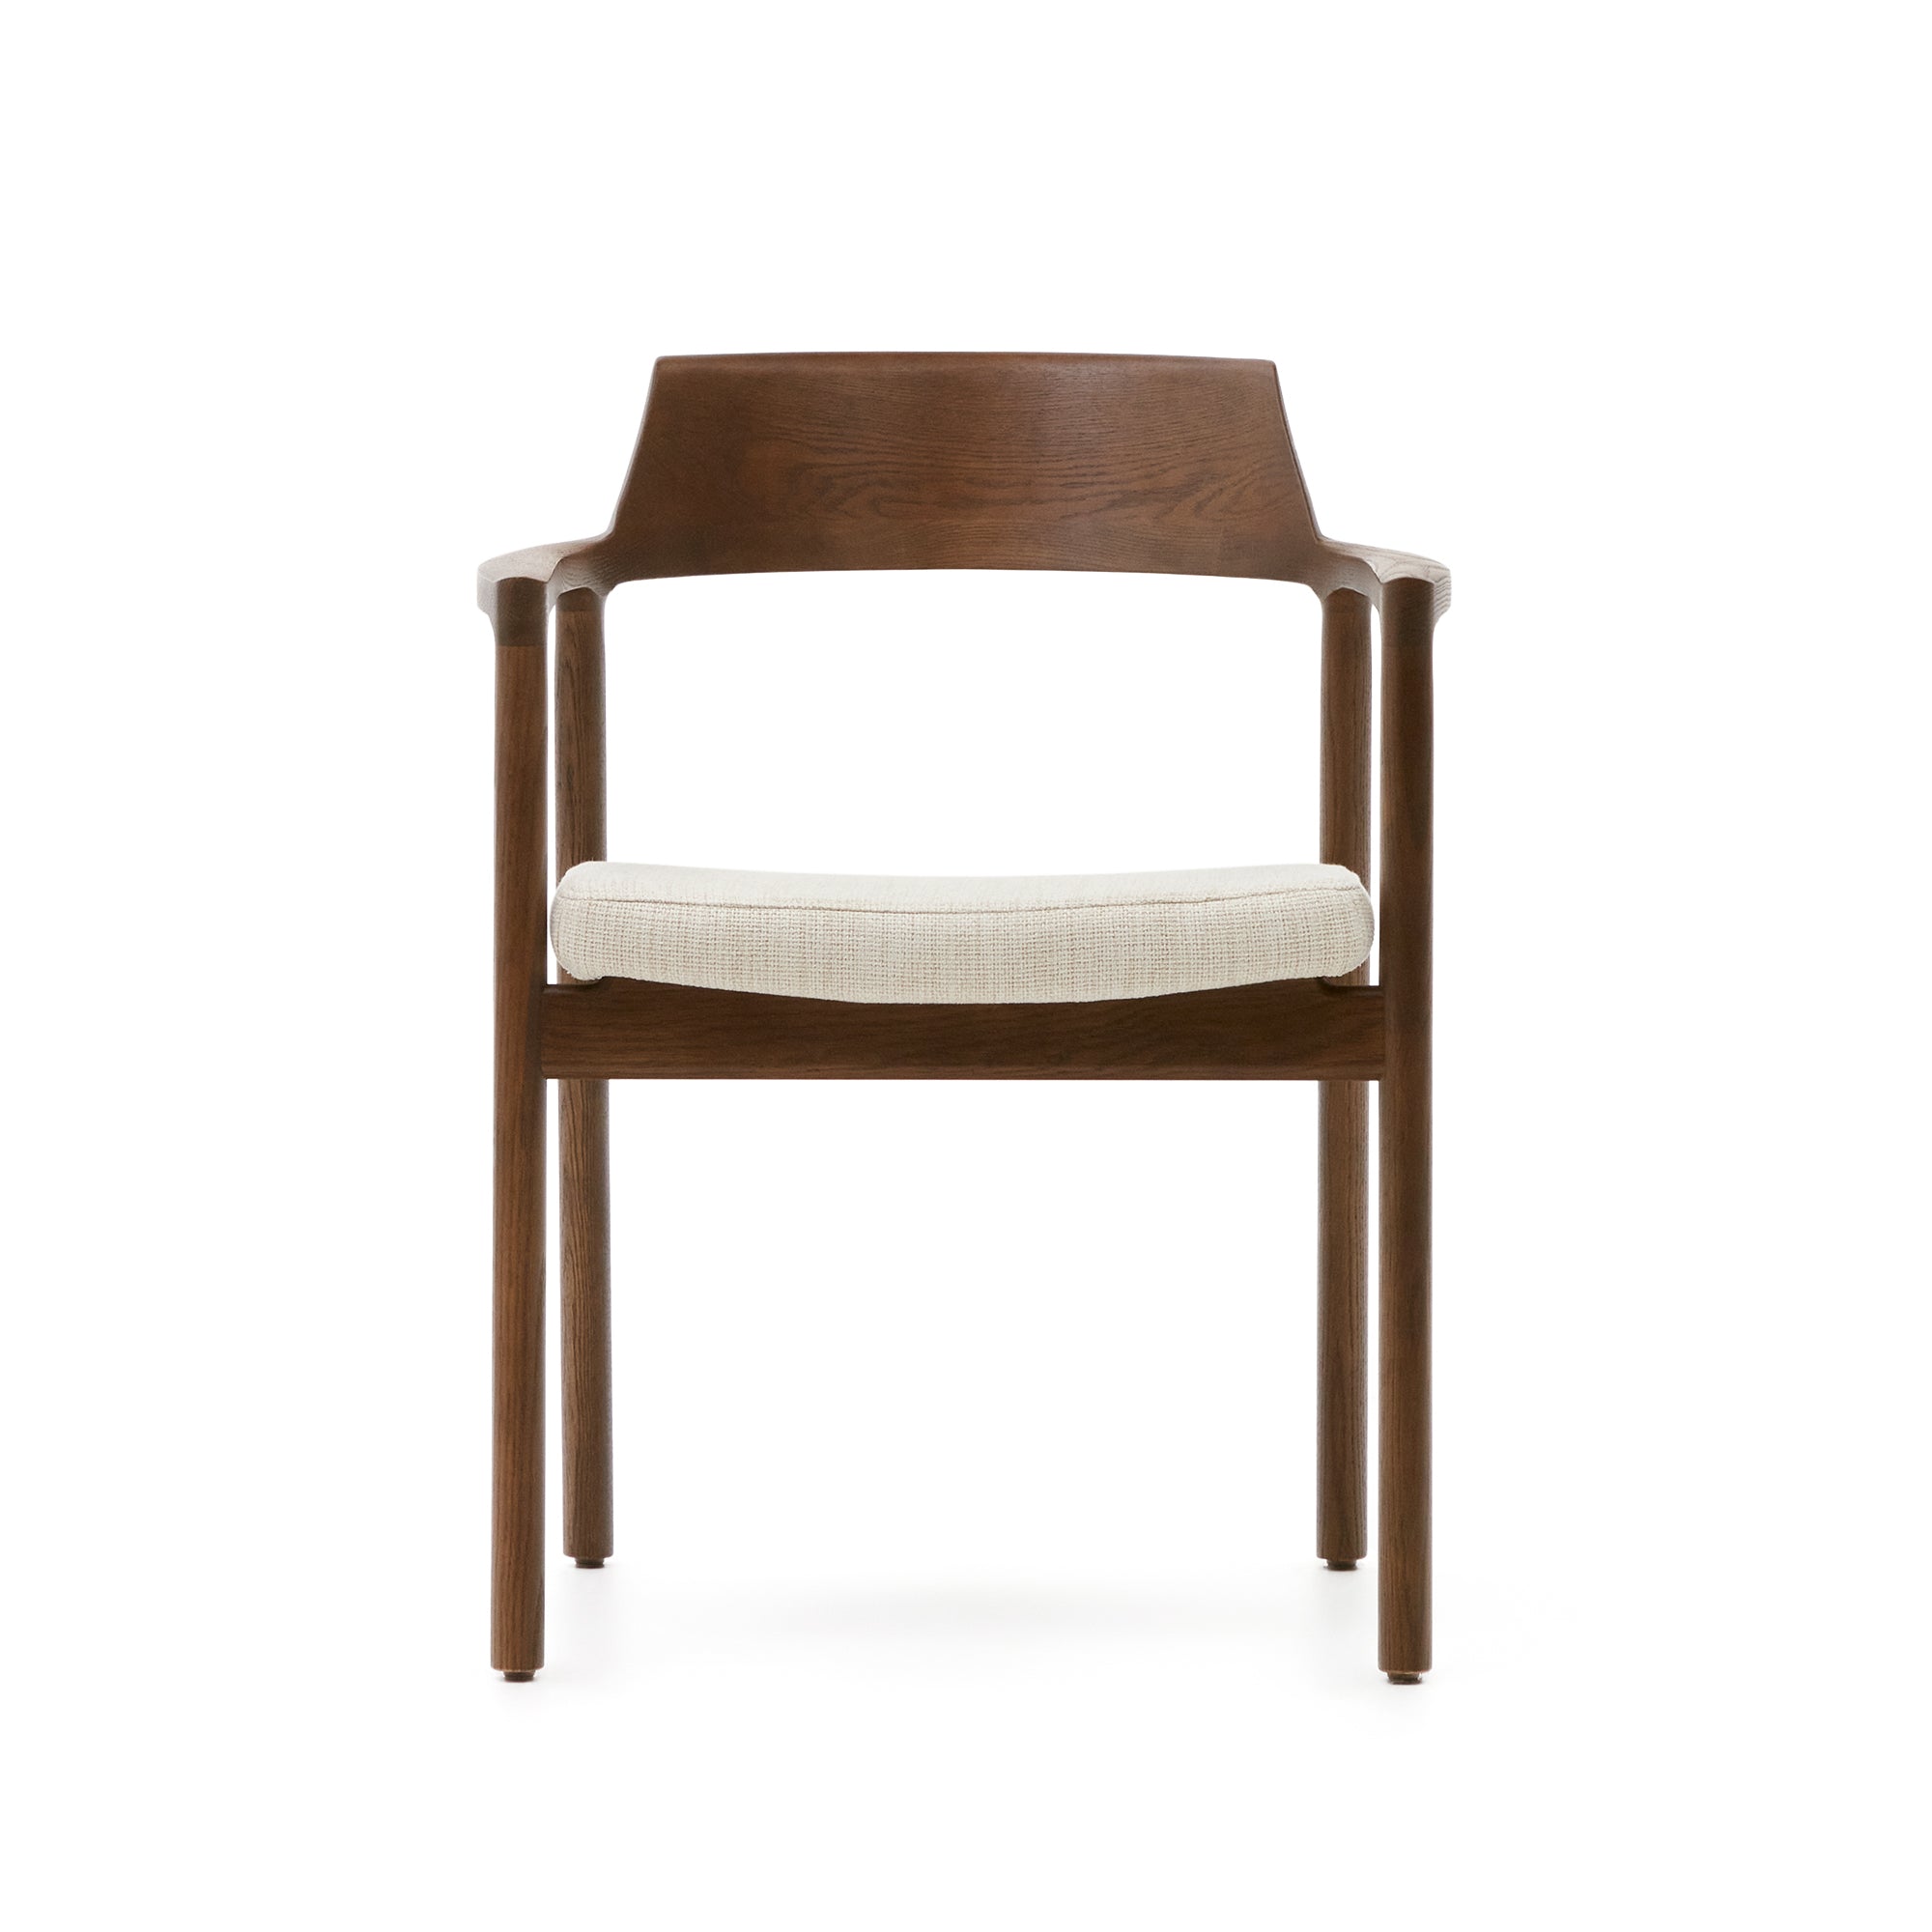 Low chair with removable cover in beige chenille, solid oak walnut finish, FSC Mix Credit